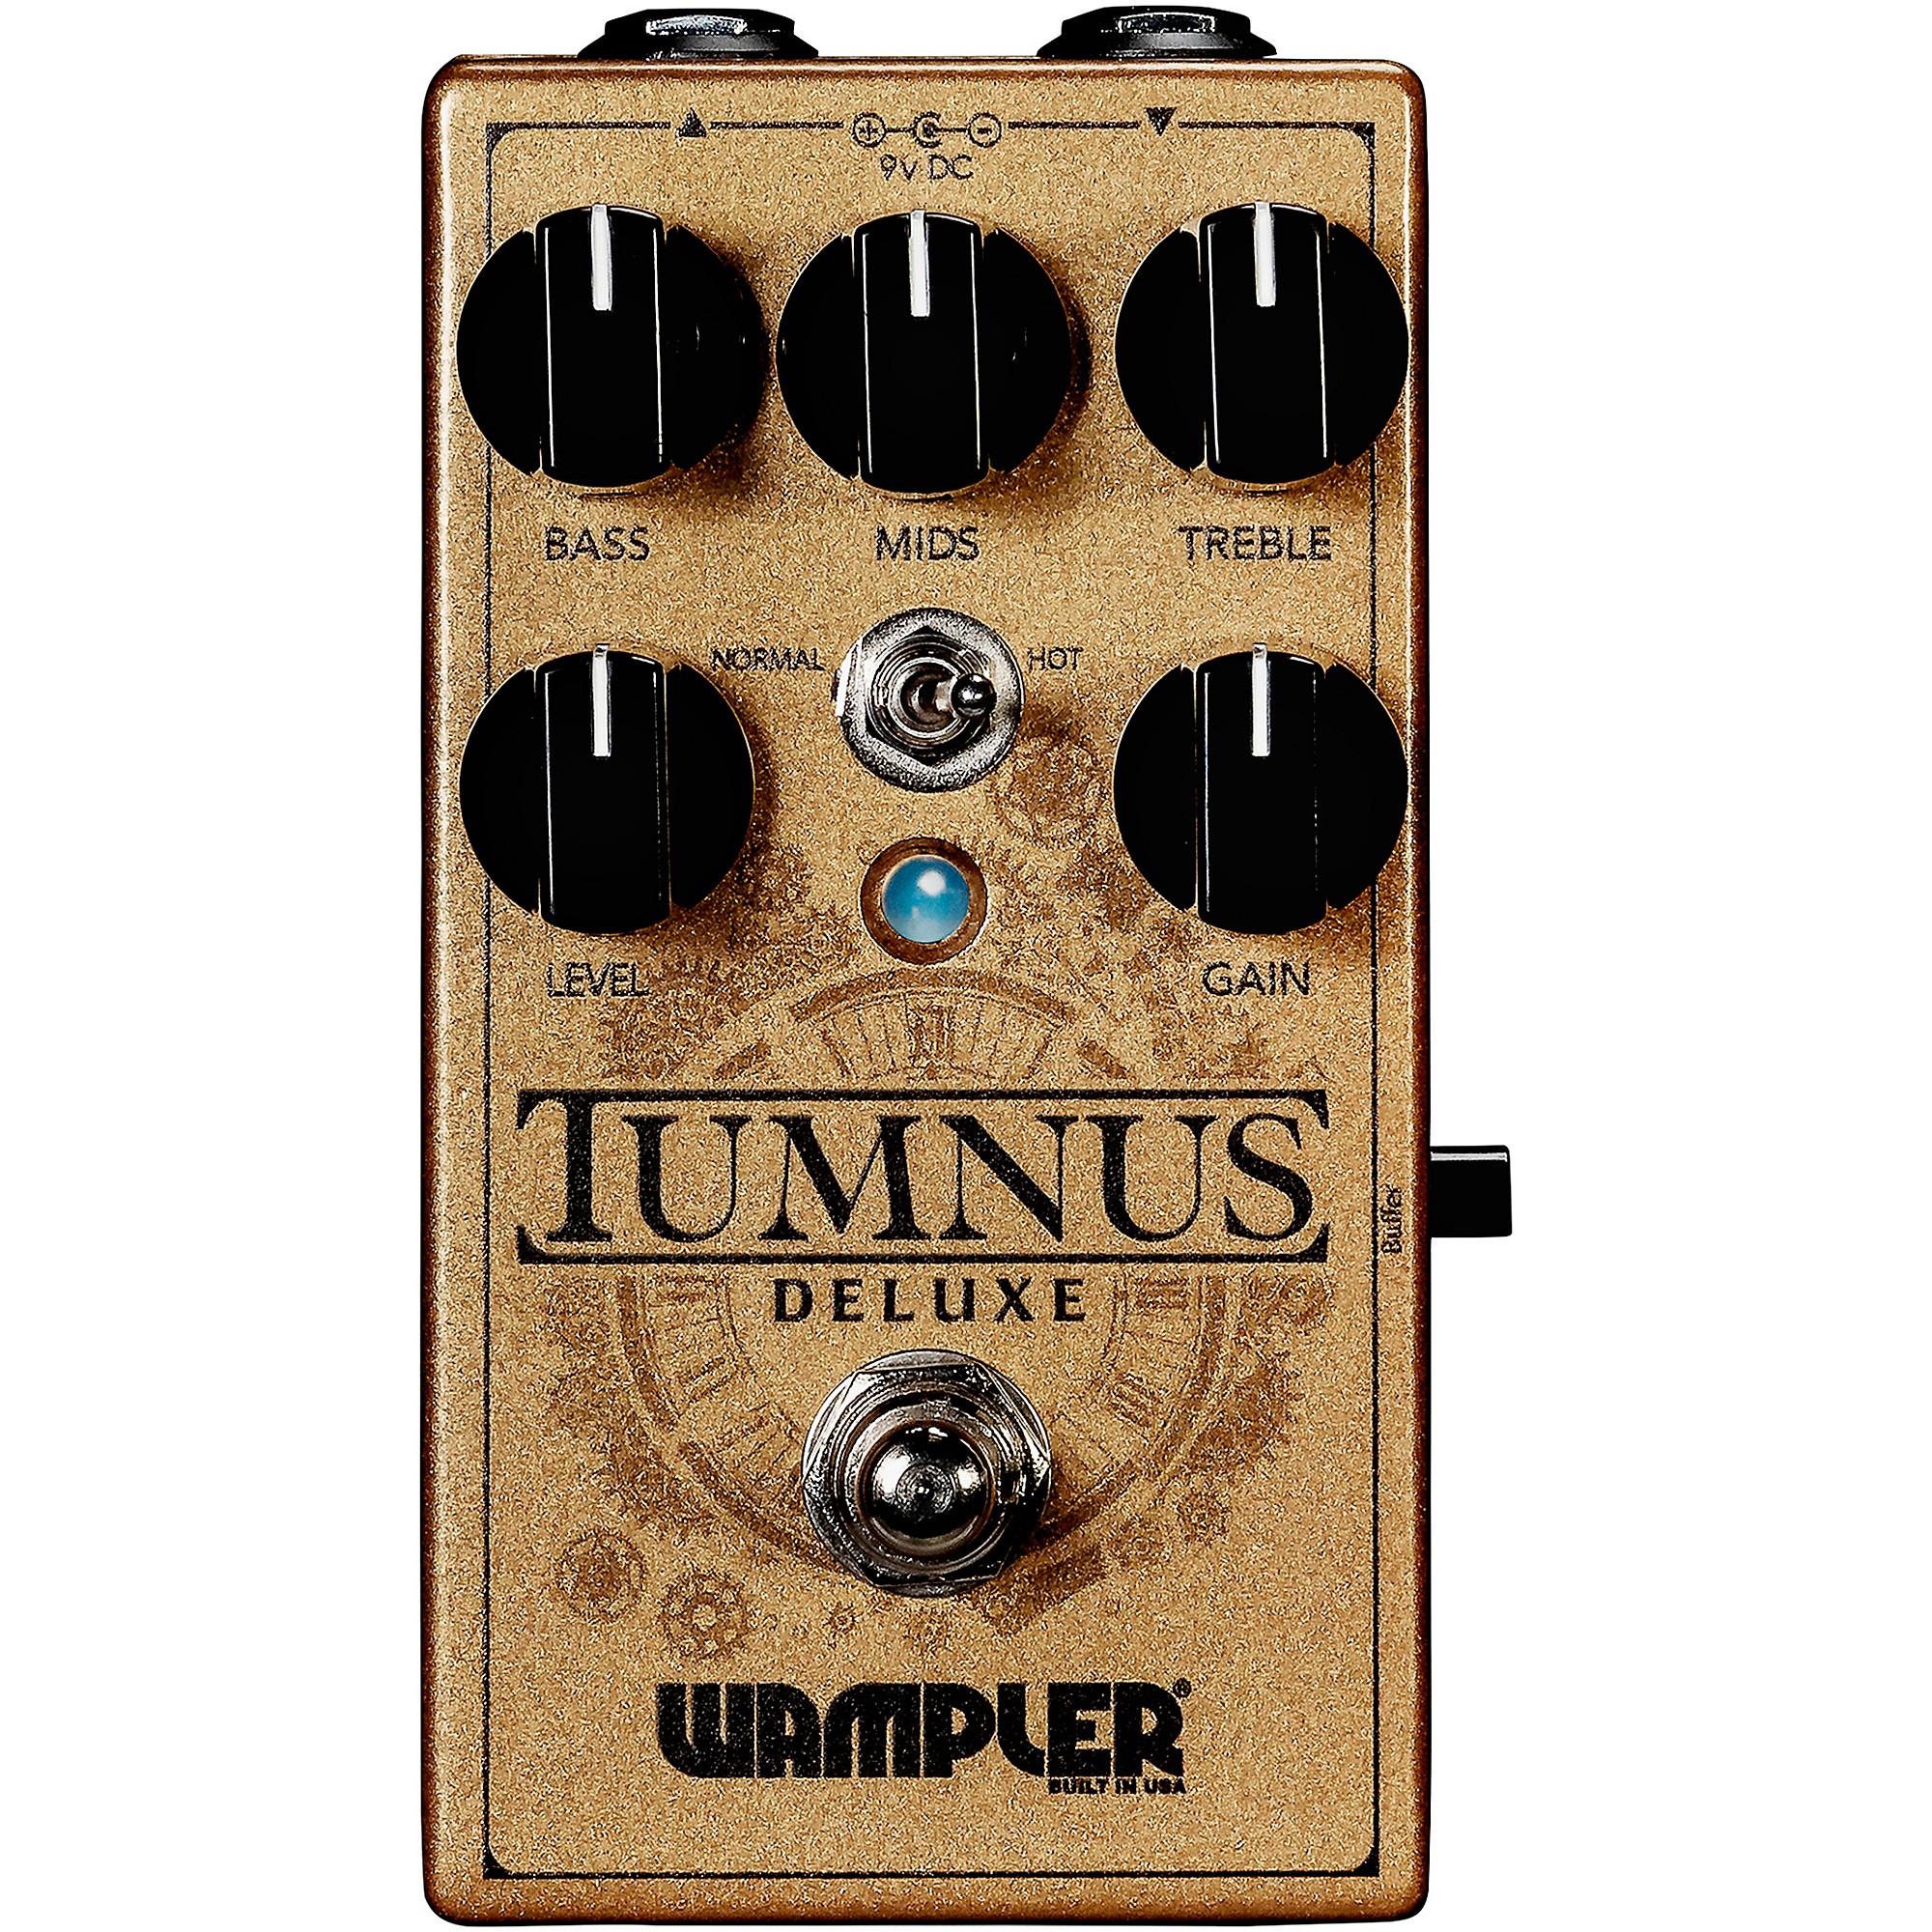 Wampler Wampler Tumnus Deluxe Overdrive Effects Pedal